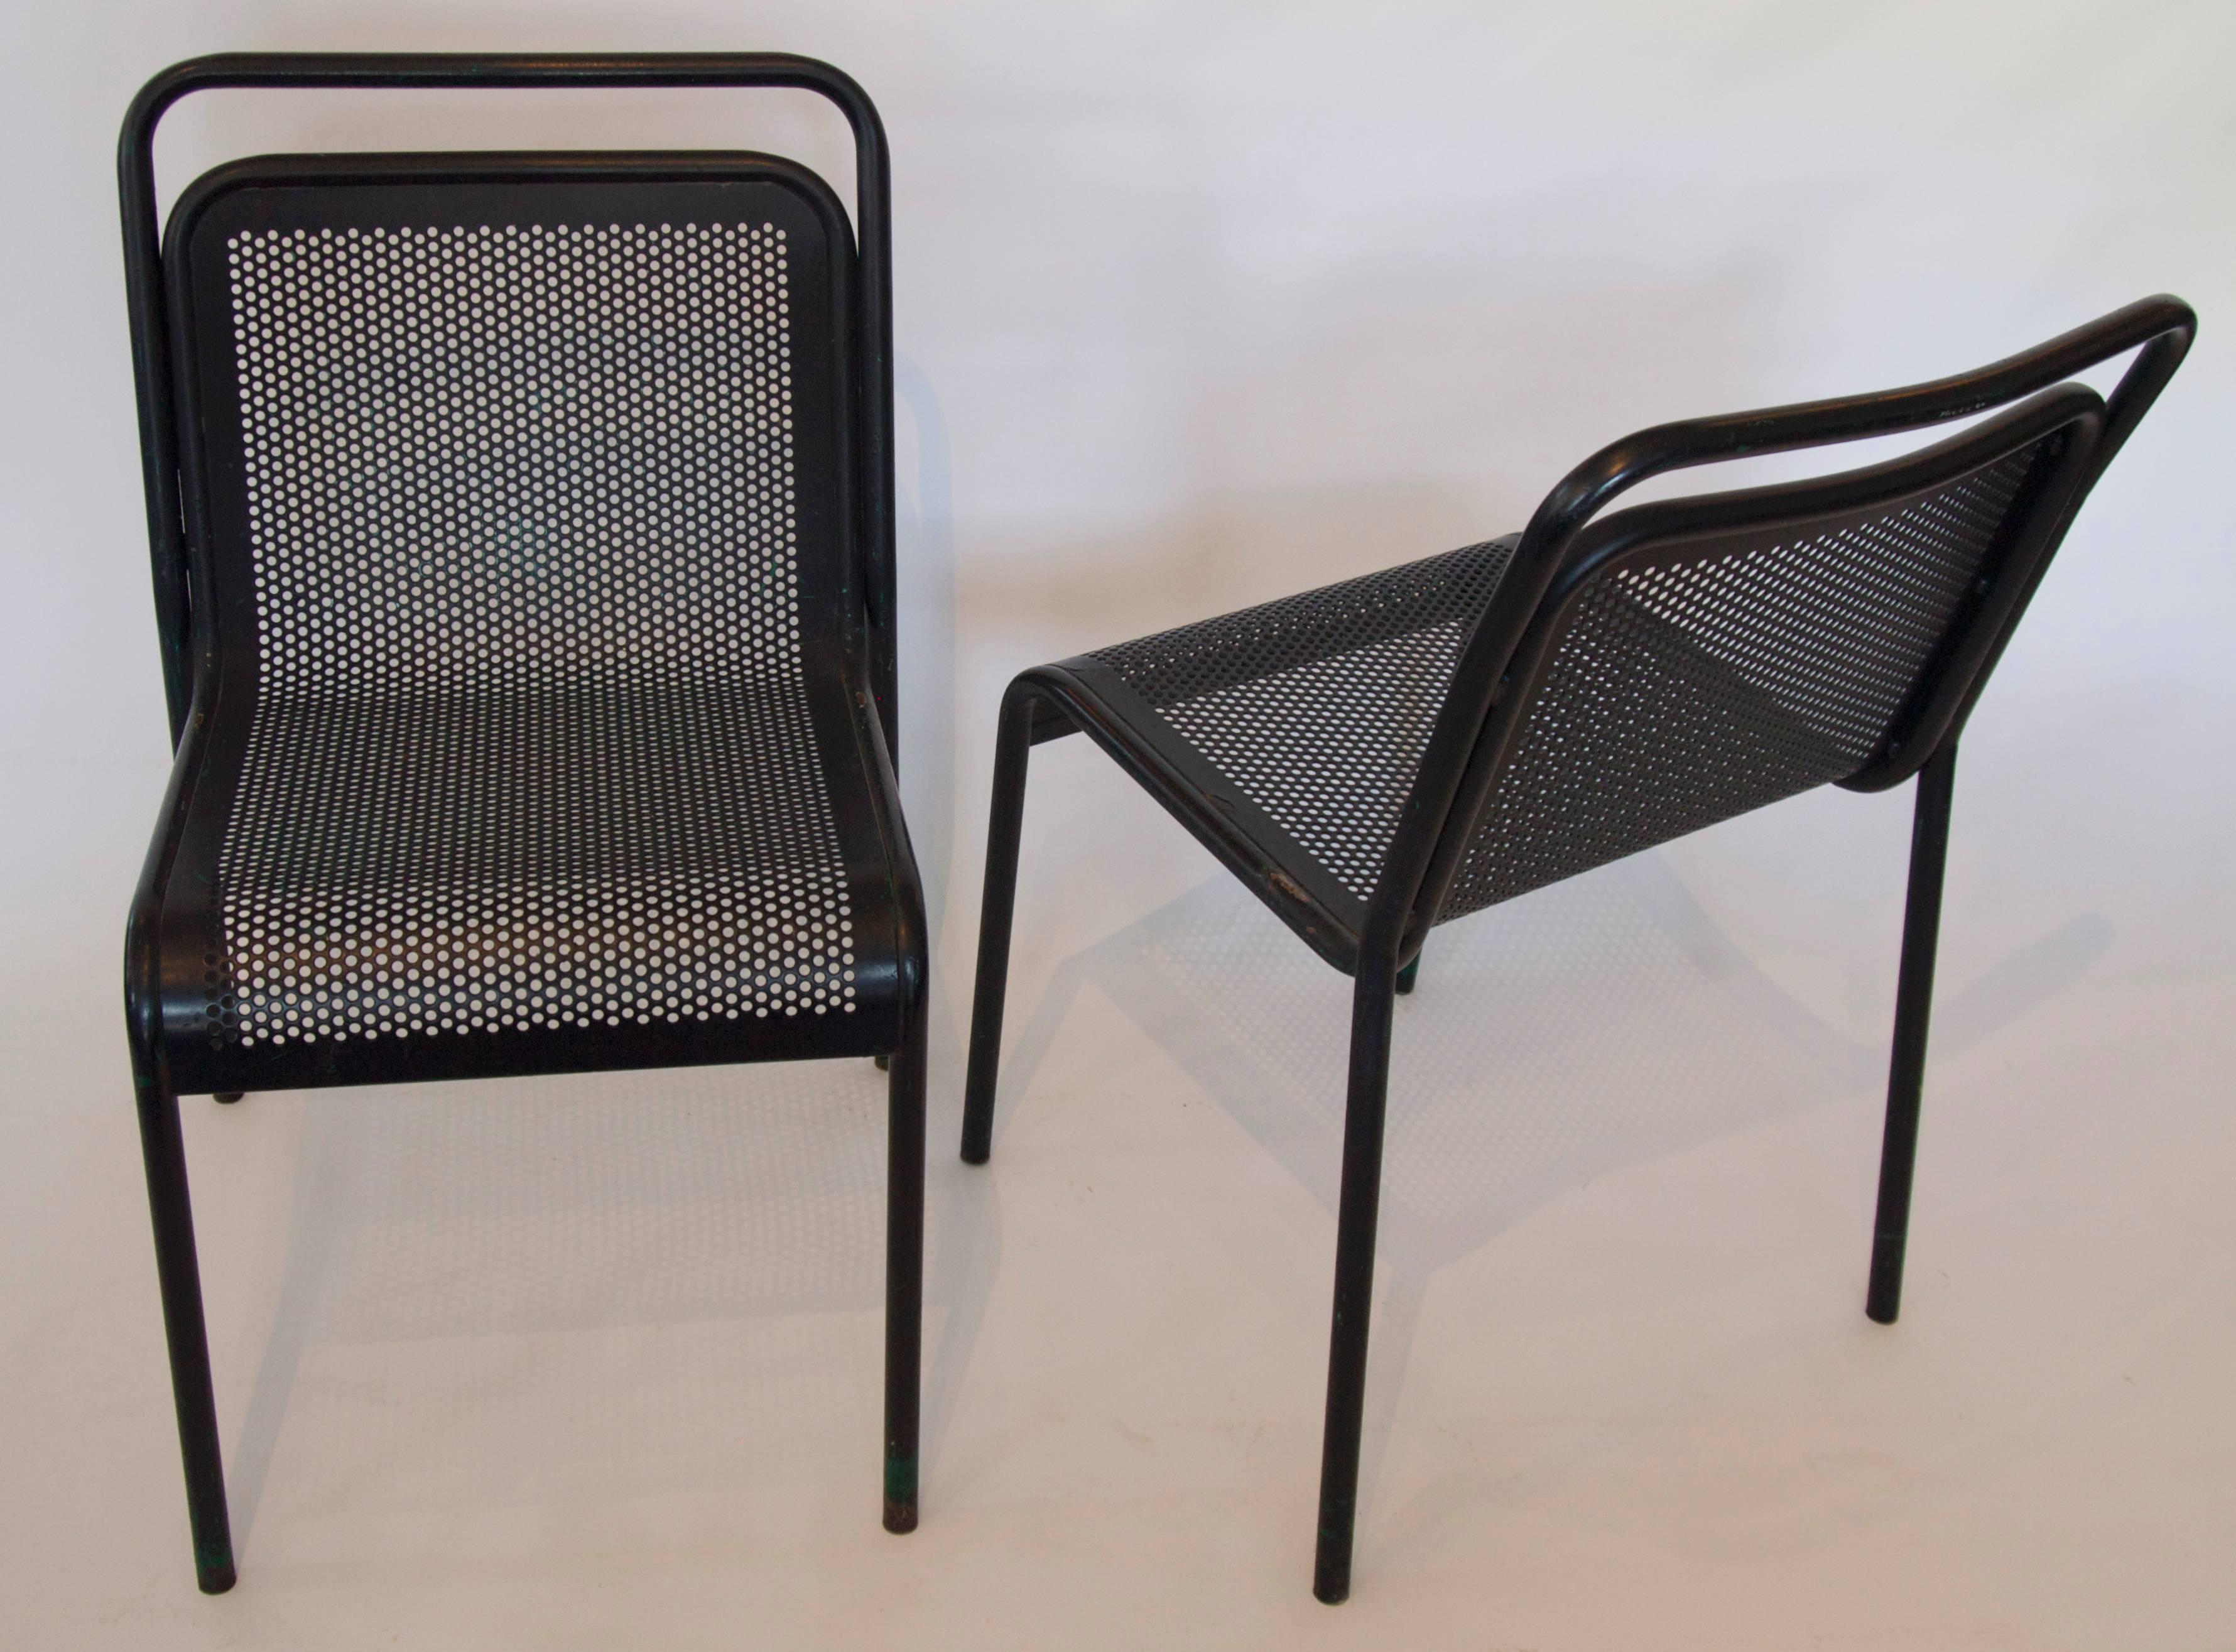 Wonderful set of 5 French black painted perforated metal stacking garden chairs form the mid-20th century.